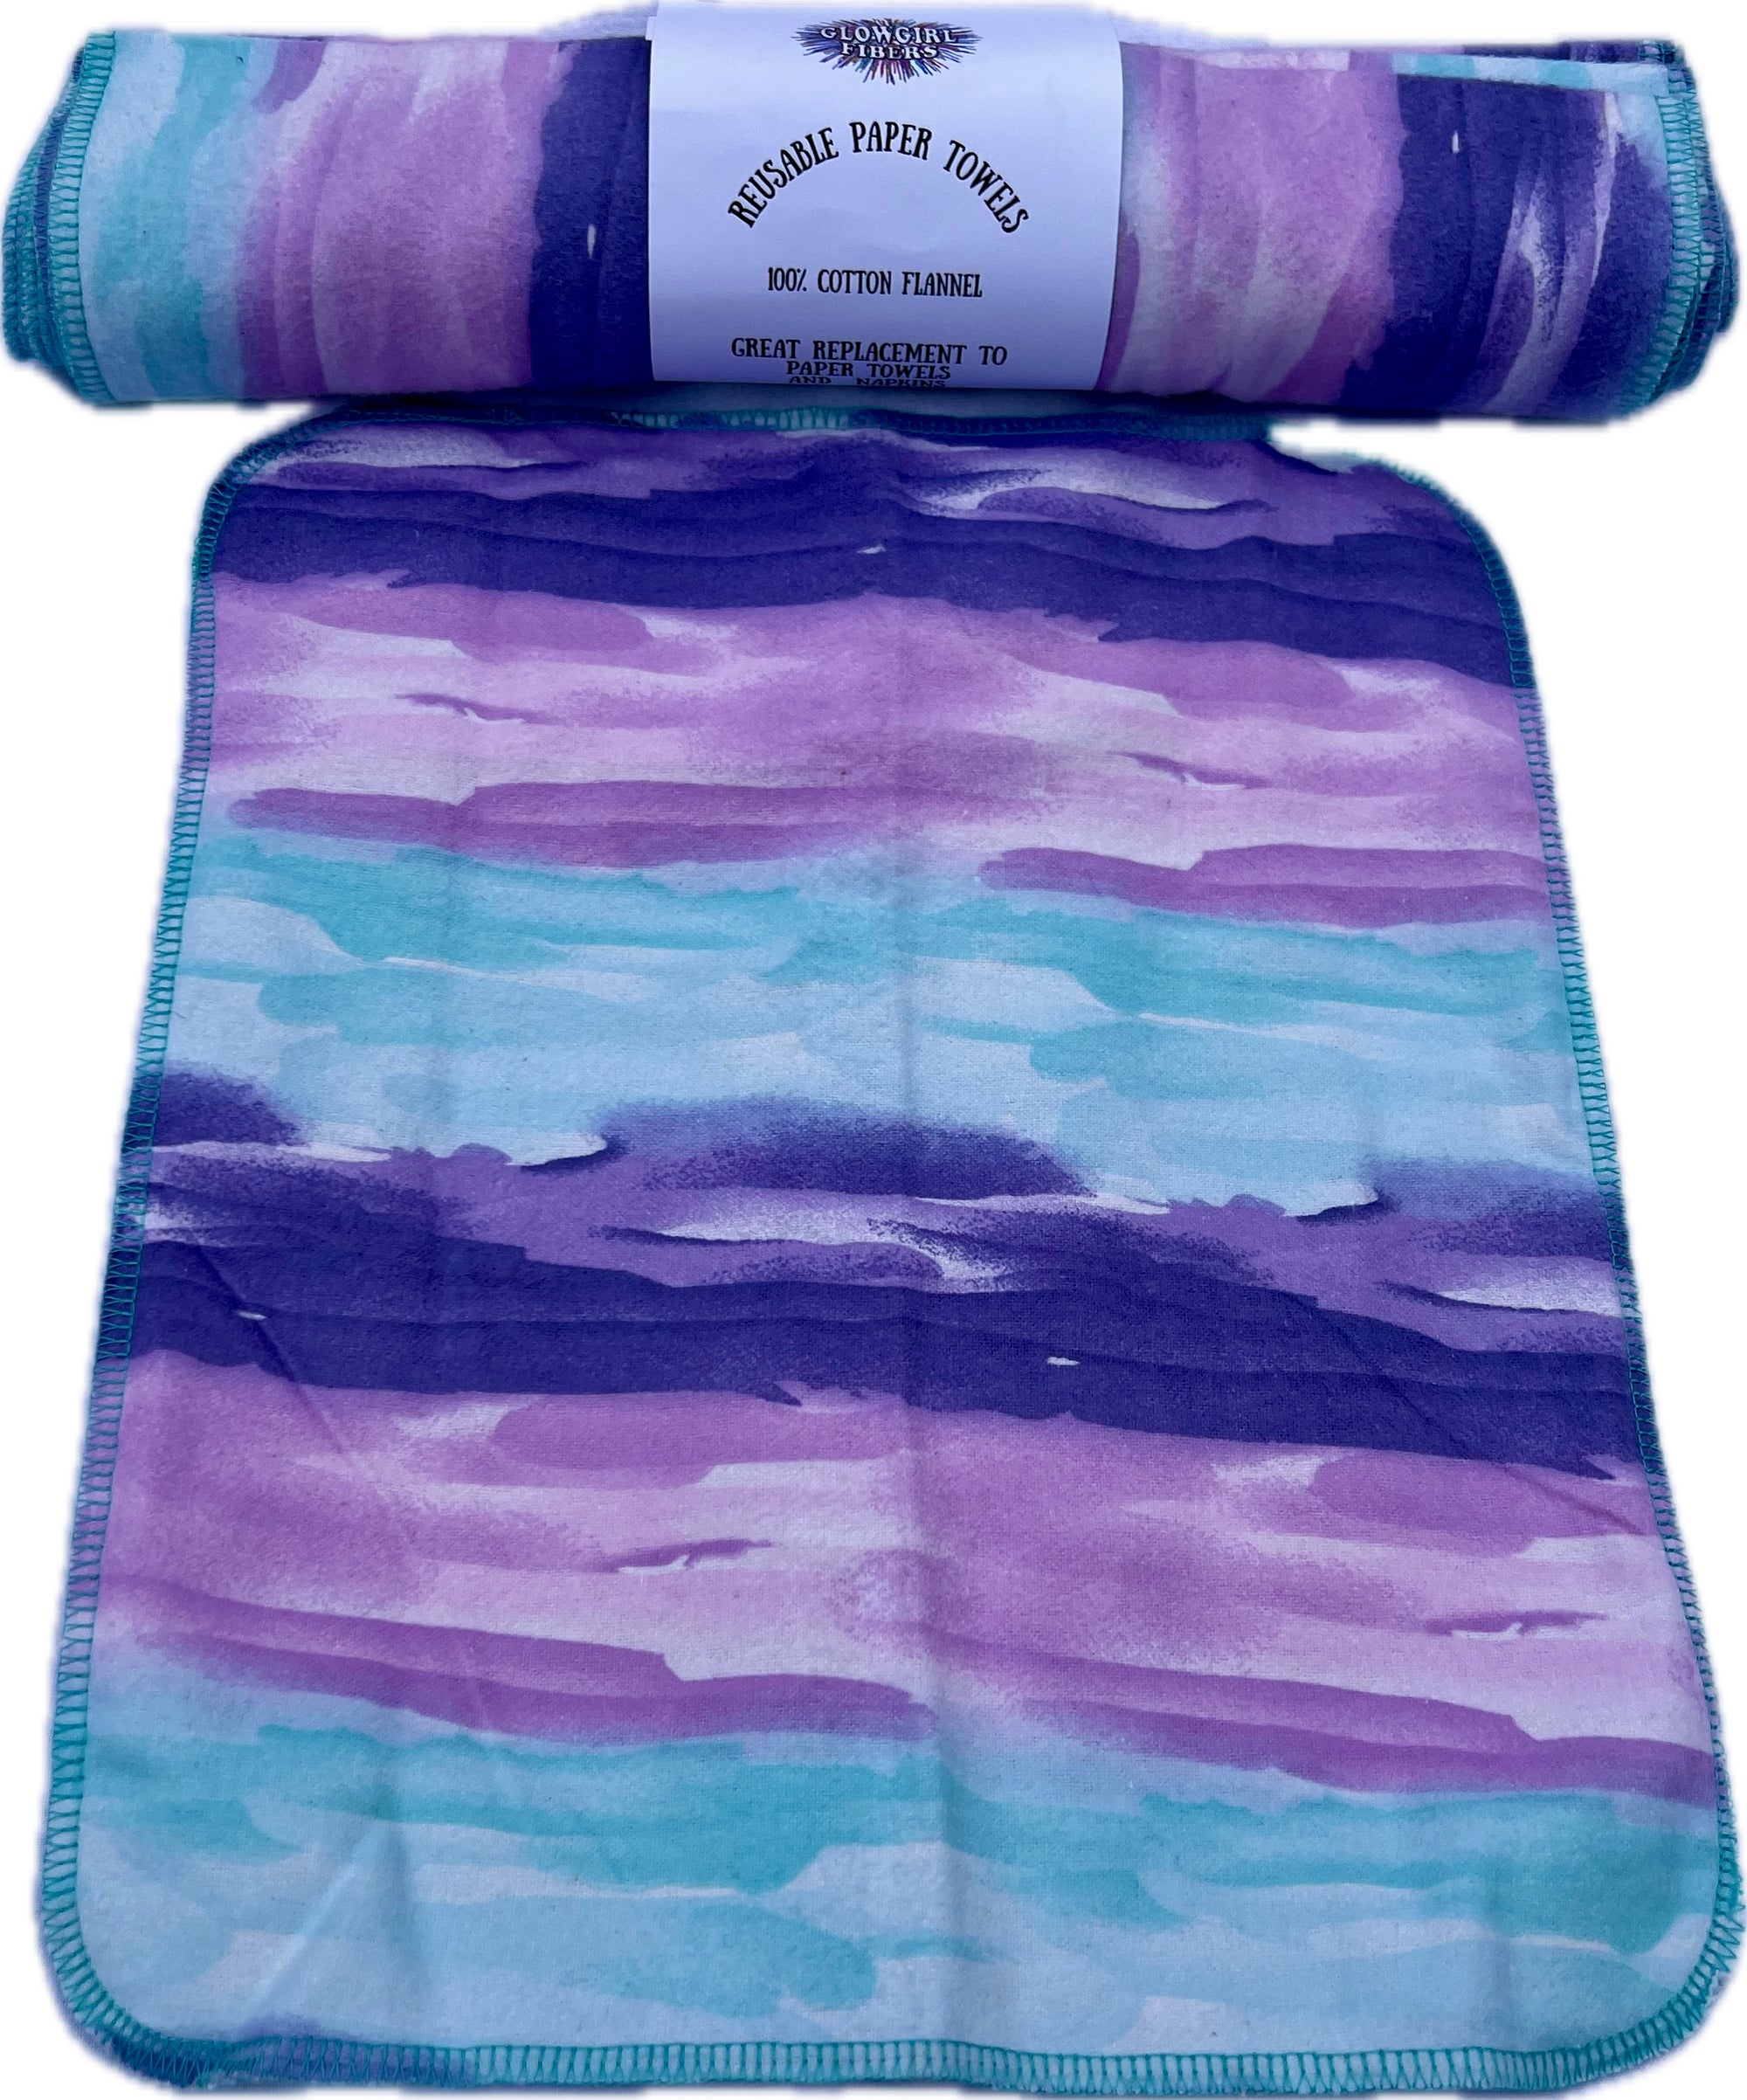 Non Paper Towels Large 10x12 Full size Sheets Set of 6  - Watercolor Teal and Purple